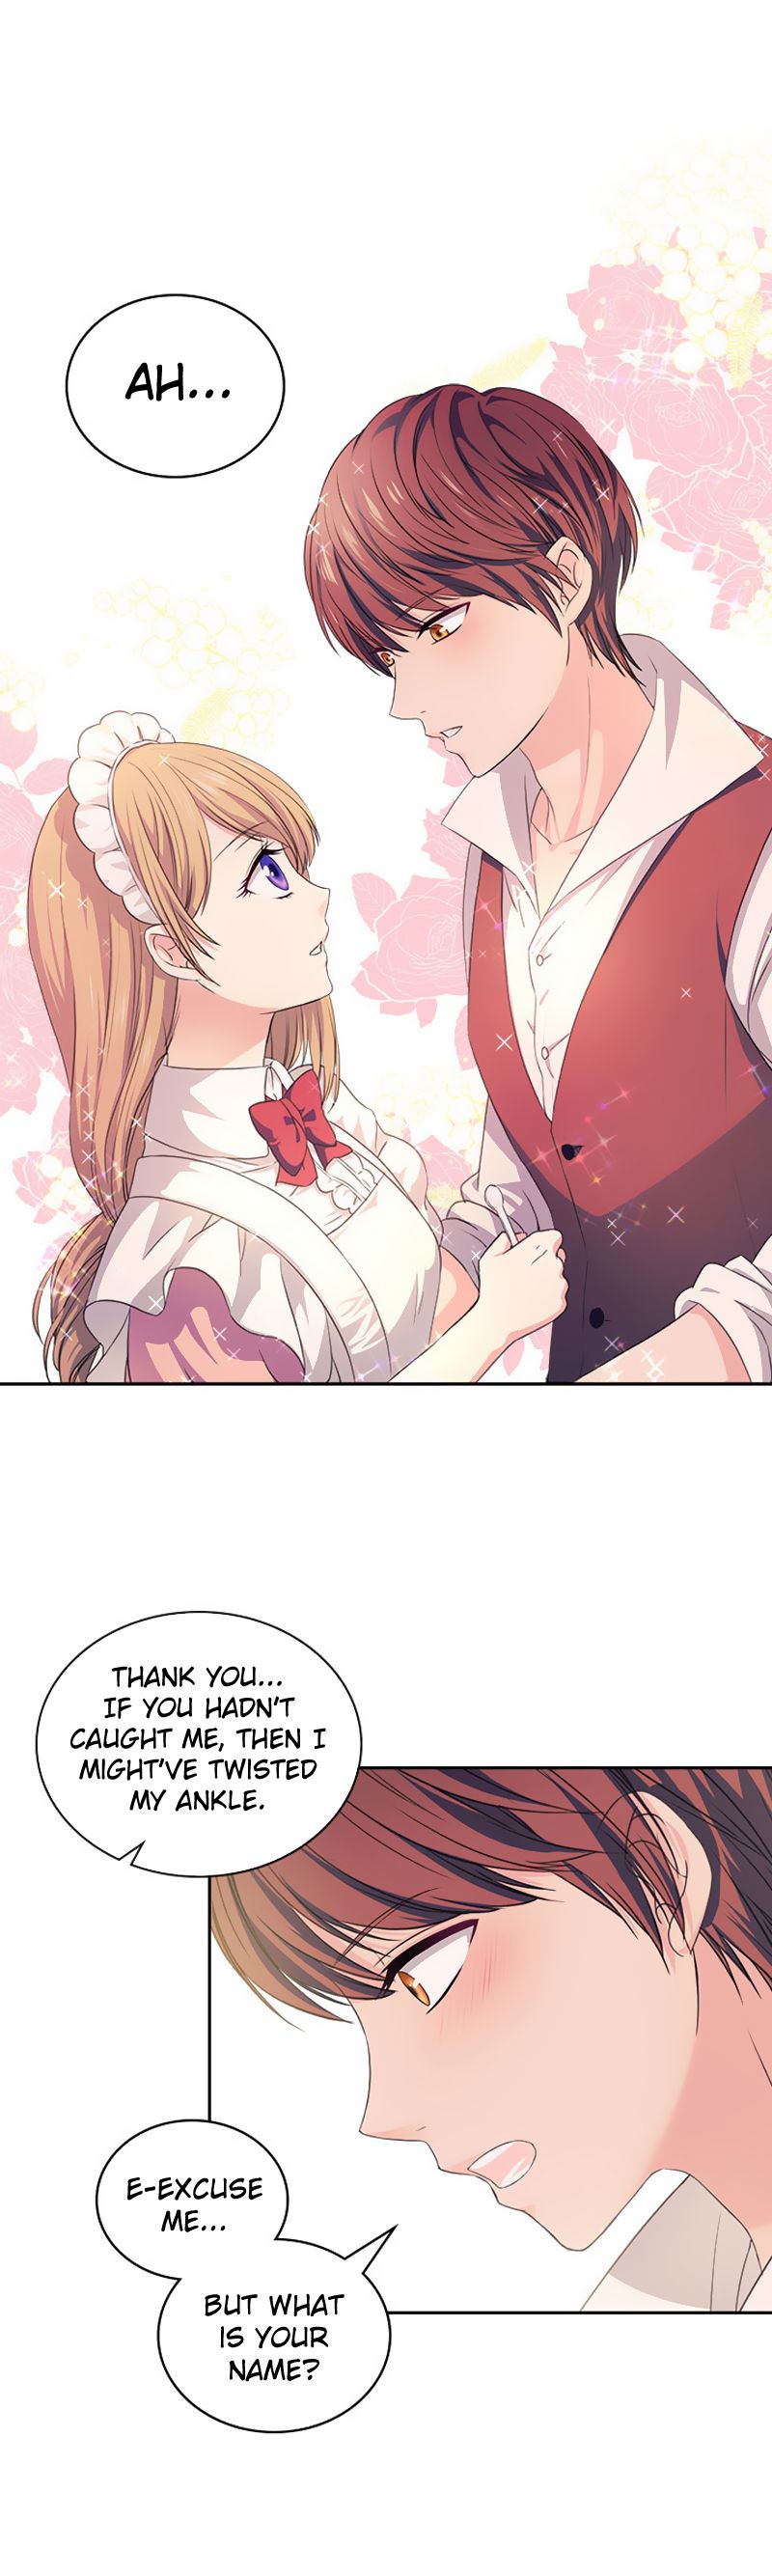 Sincerely: I Became a Duke’s Maid chapter 16